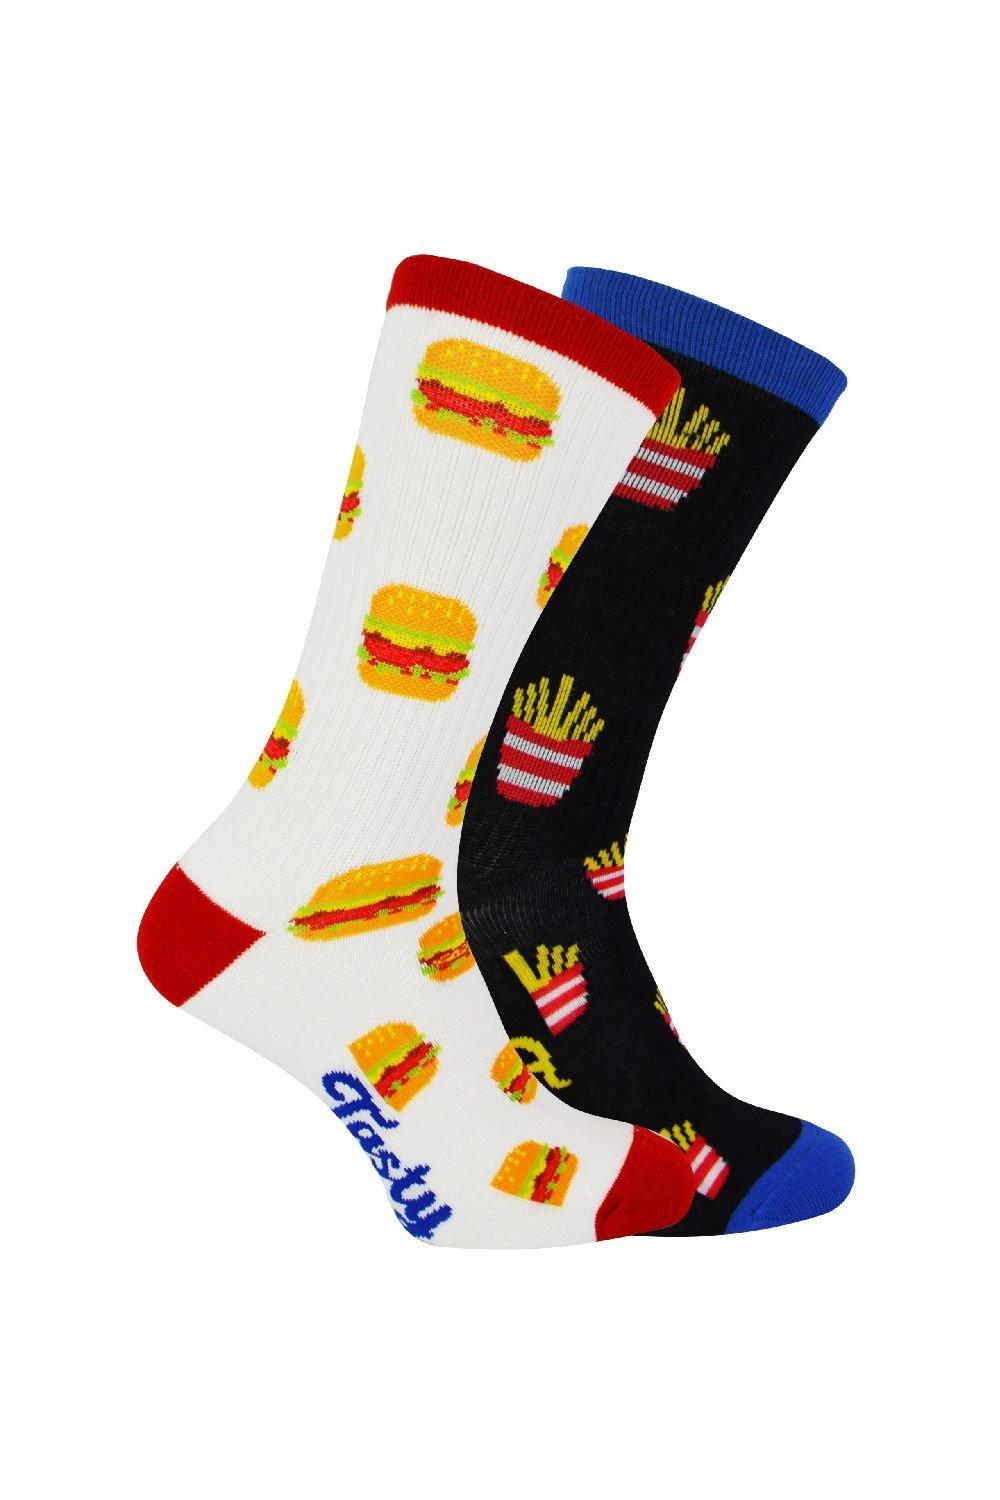 2 Pairs Novelty Soft Cotton Burger Socks in a Gift Box